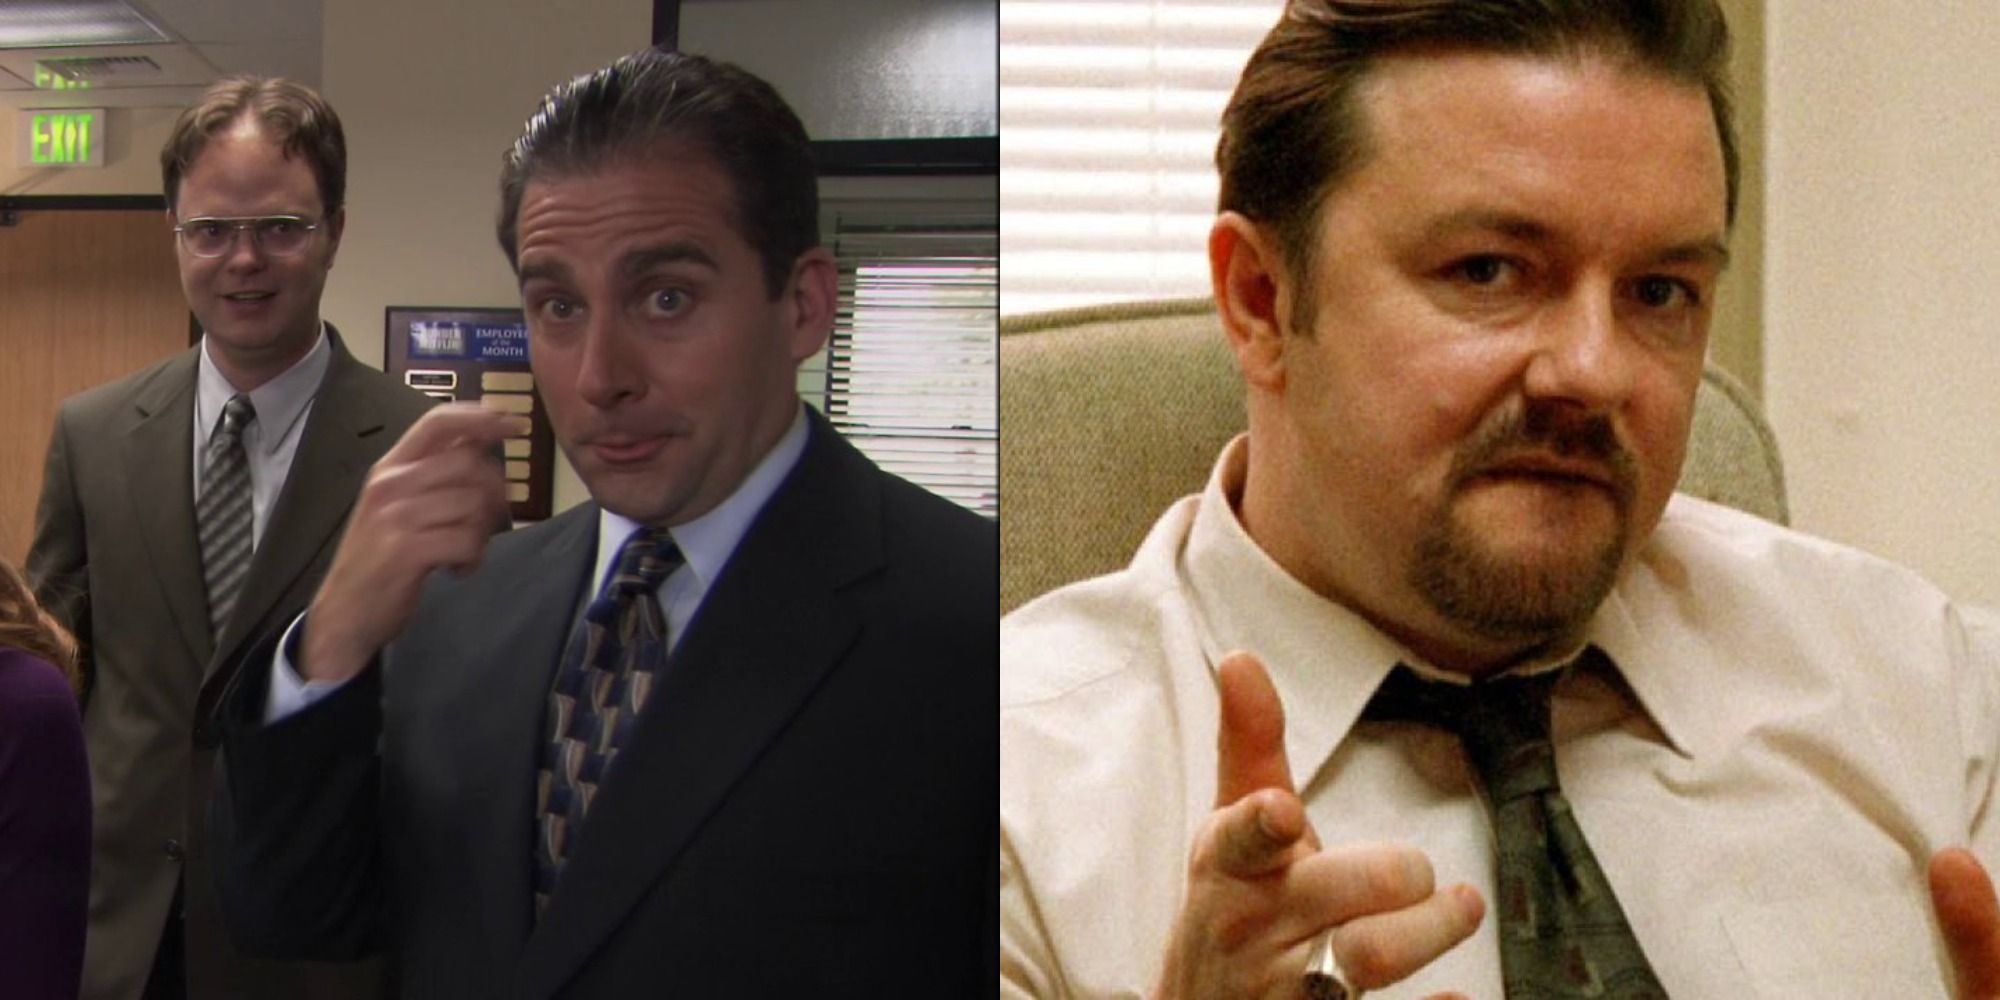 The Office': 10 Times The . Series Overshadowed The UK Original